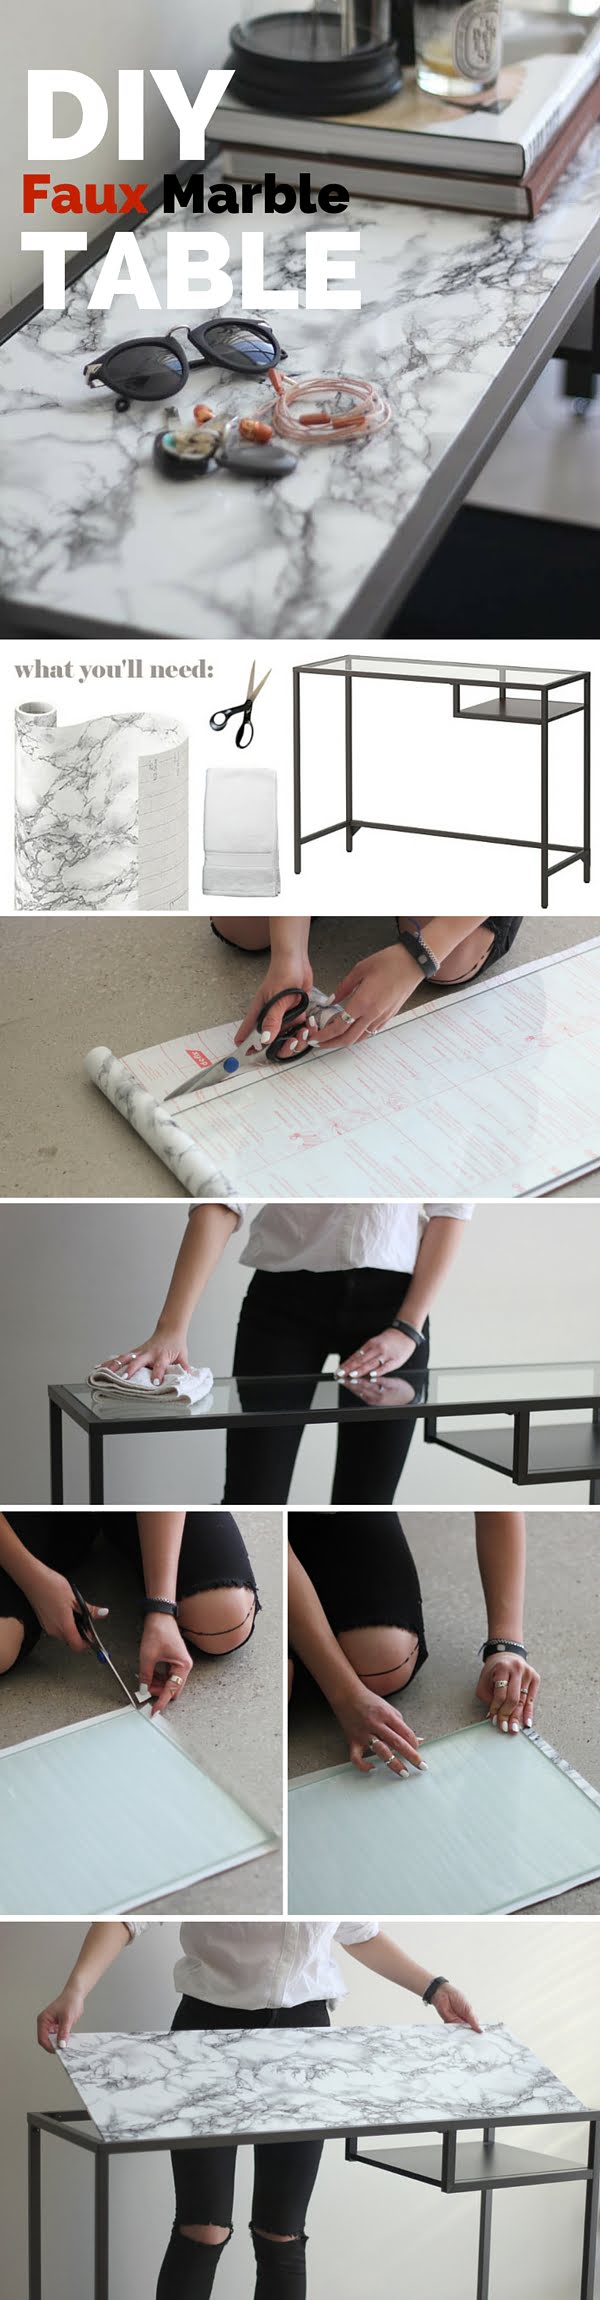 Check out the tutorial:  Faux Marble Table  